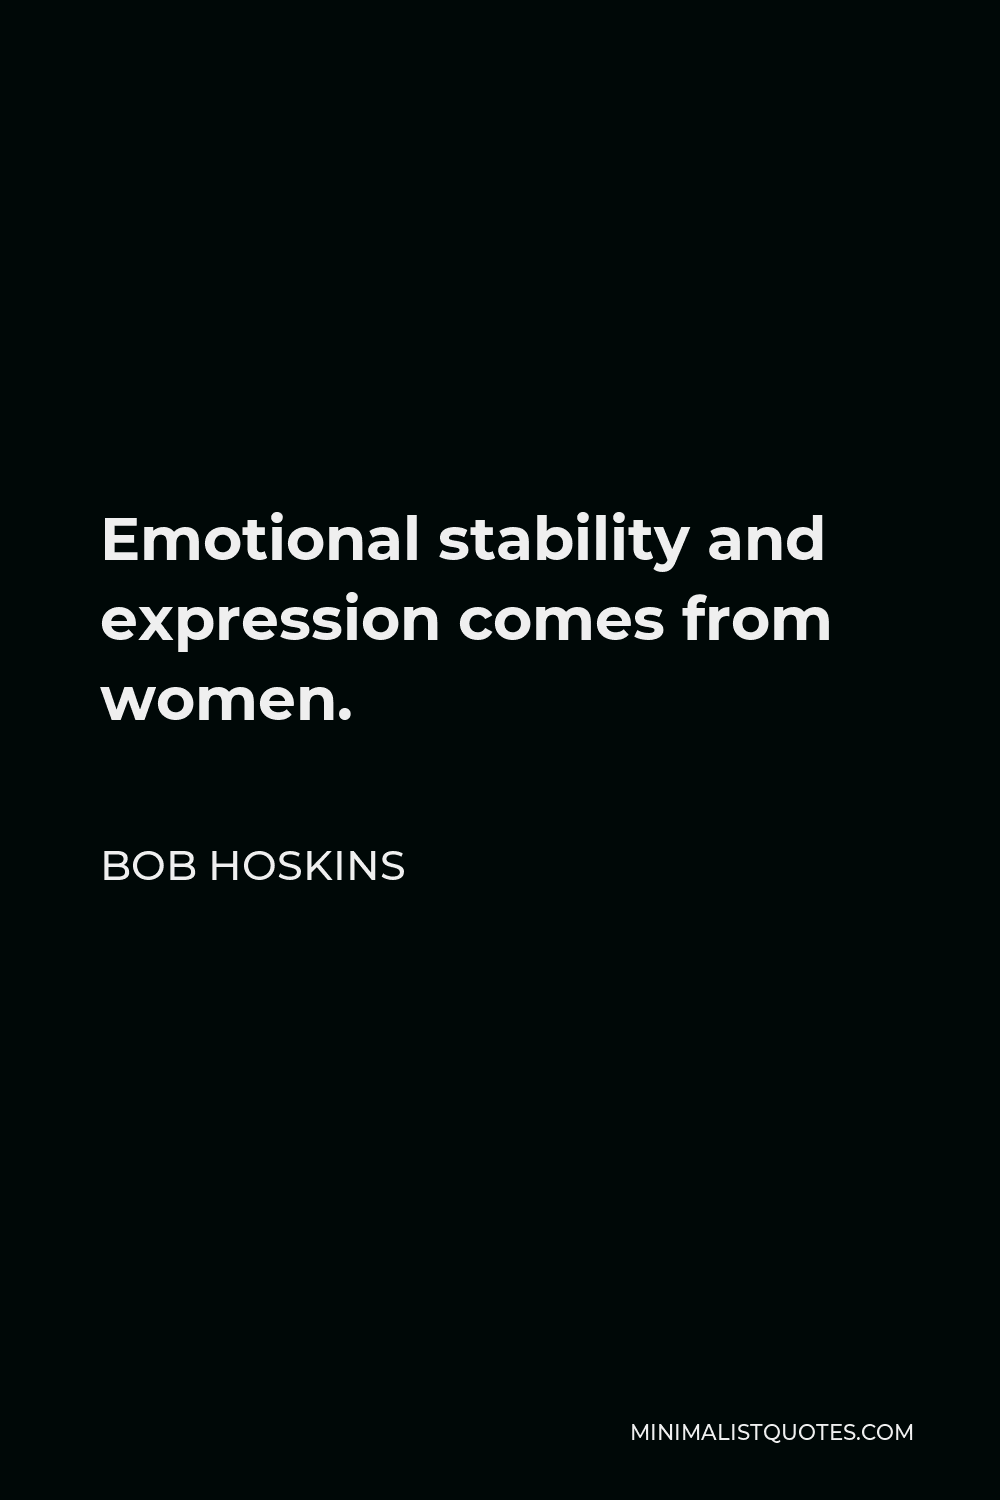 Bob Hoskins Quote - Emotional stability and expression comes from women.